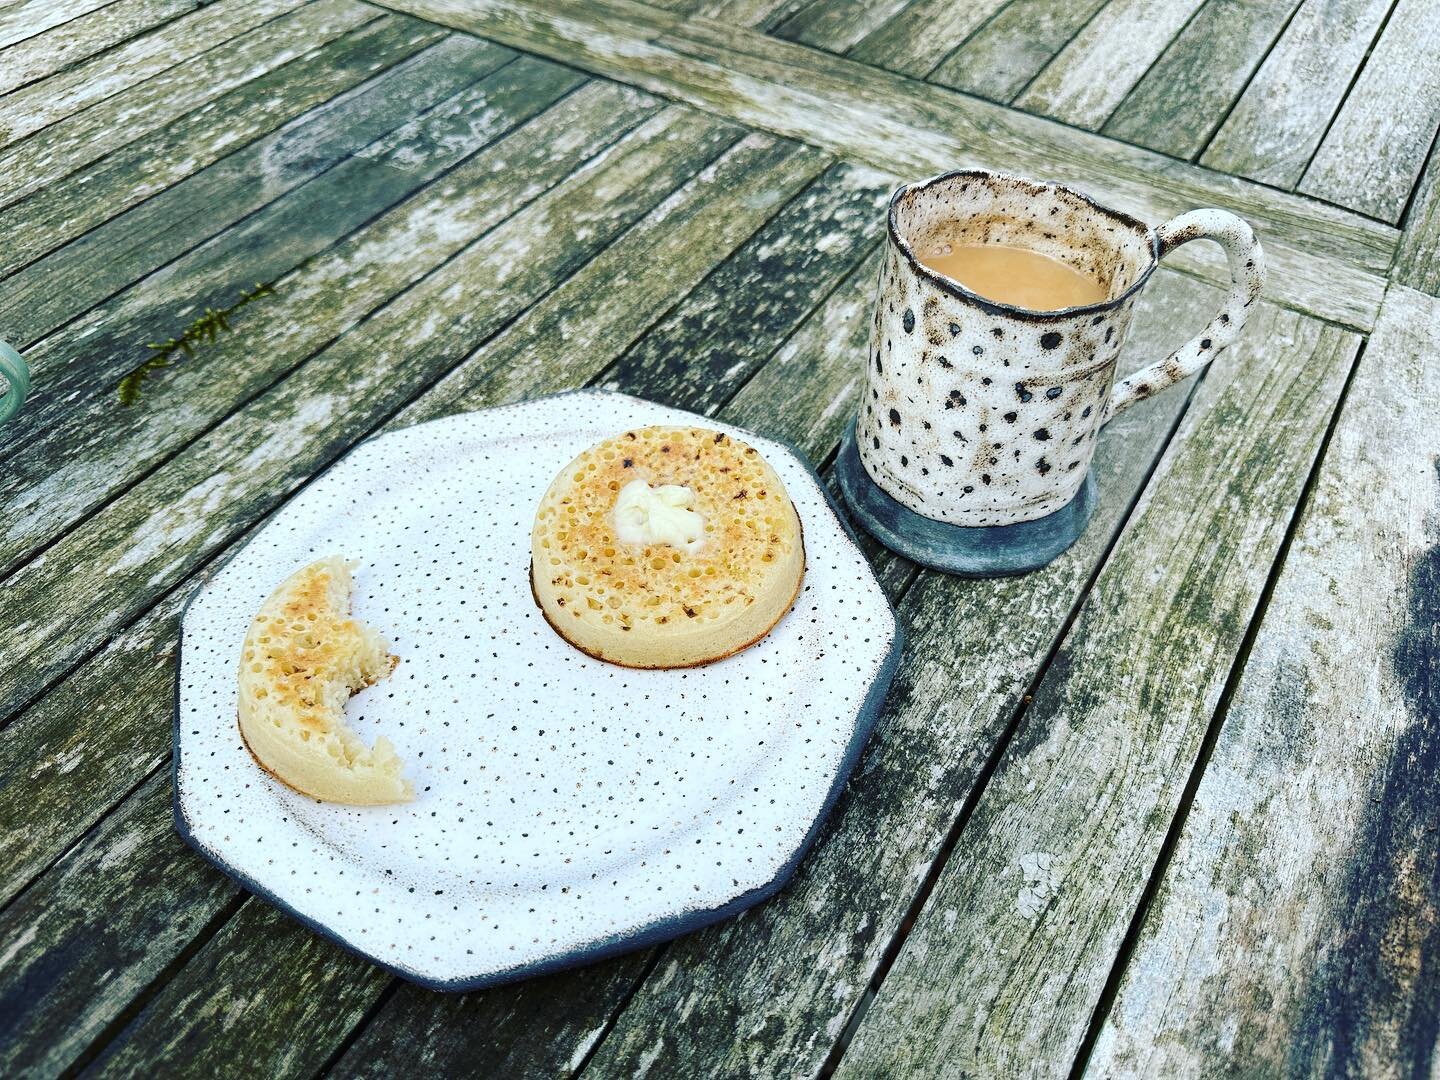 Inspired by crumpets and enjoyed with crumpets 😋
Want to make your own?
Sign up to our hand-building and throwing courses on Fridays or Saturday mornings in Barnes.

#handmade #slabbuiltceramics #rustic #interiorstyle #ceramicsclasseslondon #barnes 